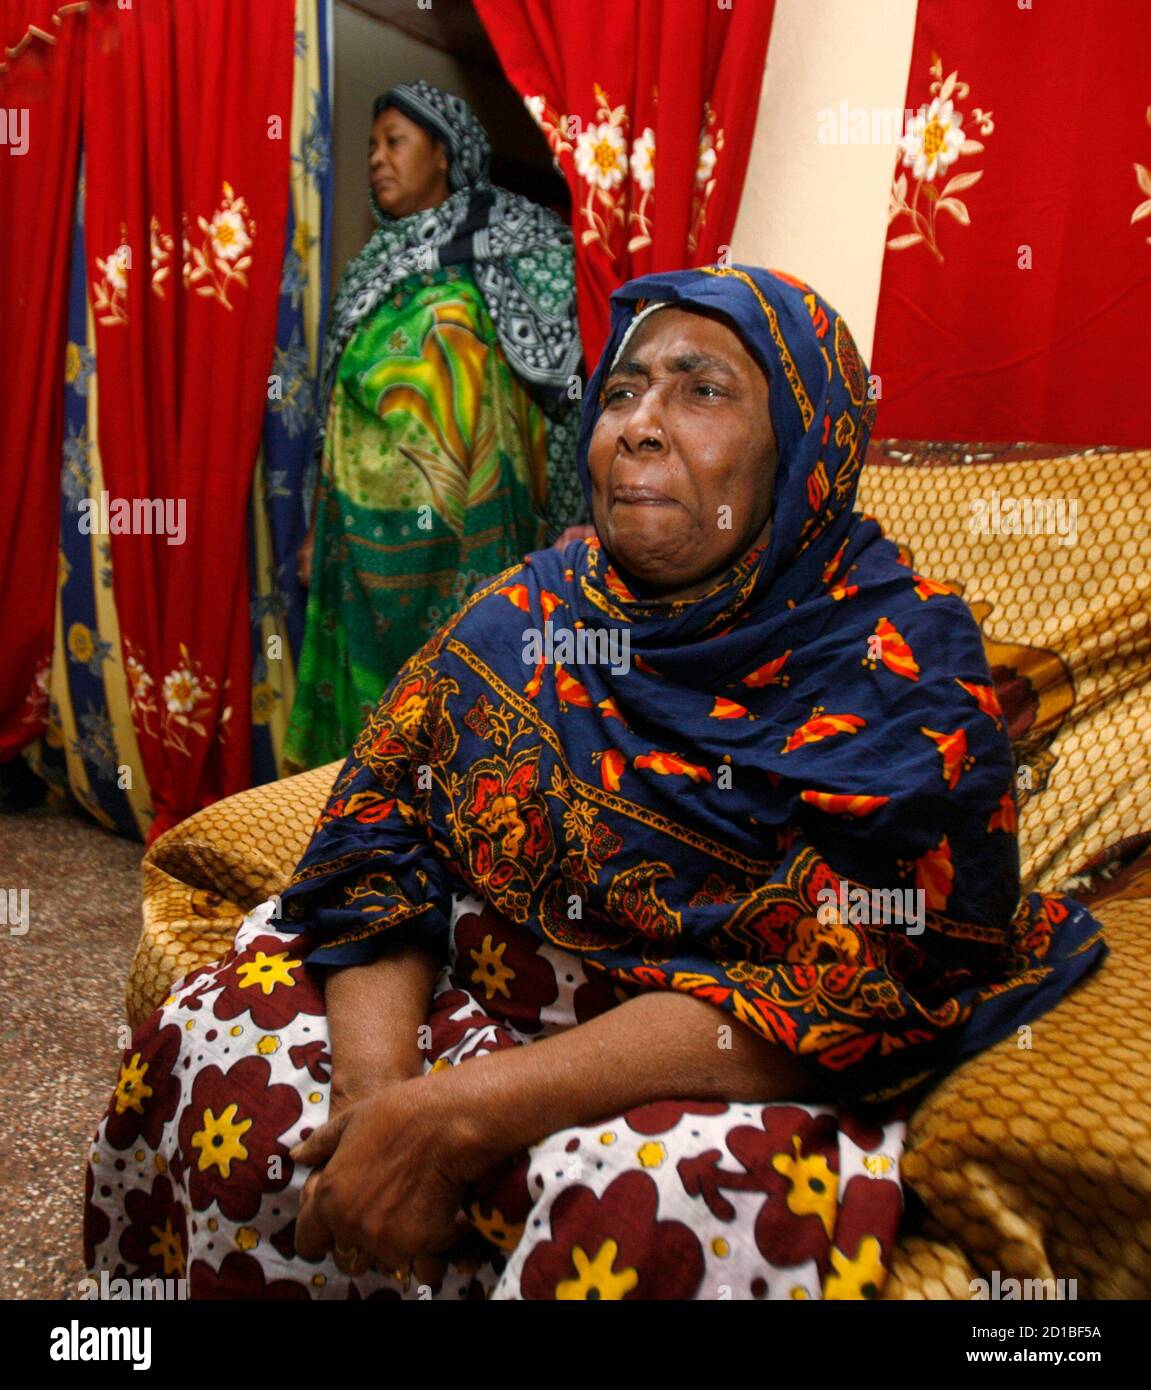 Kalathoumi Athoumani, grandmother of 14-year-old Franco-Comoran girl Bahia Bakari, the sole survivor of the Yemenia Airbus A310-300 plane crash, sits inside her house in Nioumazadha village in Bambao area, about 15 km (9 miles) south of Comoros' capital Moroni, July 3, 2009. The sole survivor of the Yemeni jet that plunged into the Indian Ocean off the Comoros islands was reunited with her father in France, but rescuers said hopes of another miracle find were all but over. REUTERS/Thomas Mukoya (COMOROS DISASTER TRANSPORT) Stock Photo